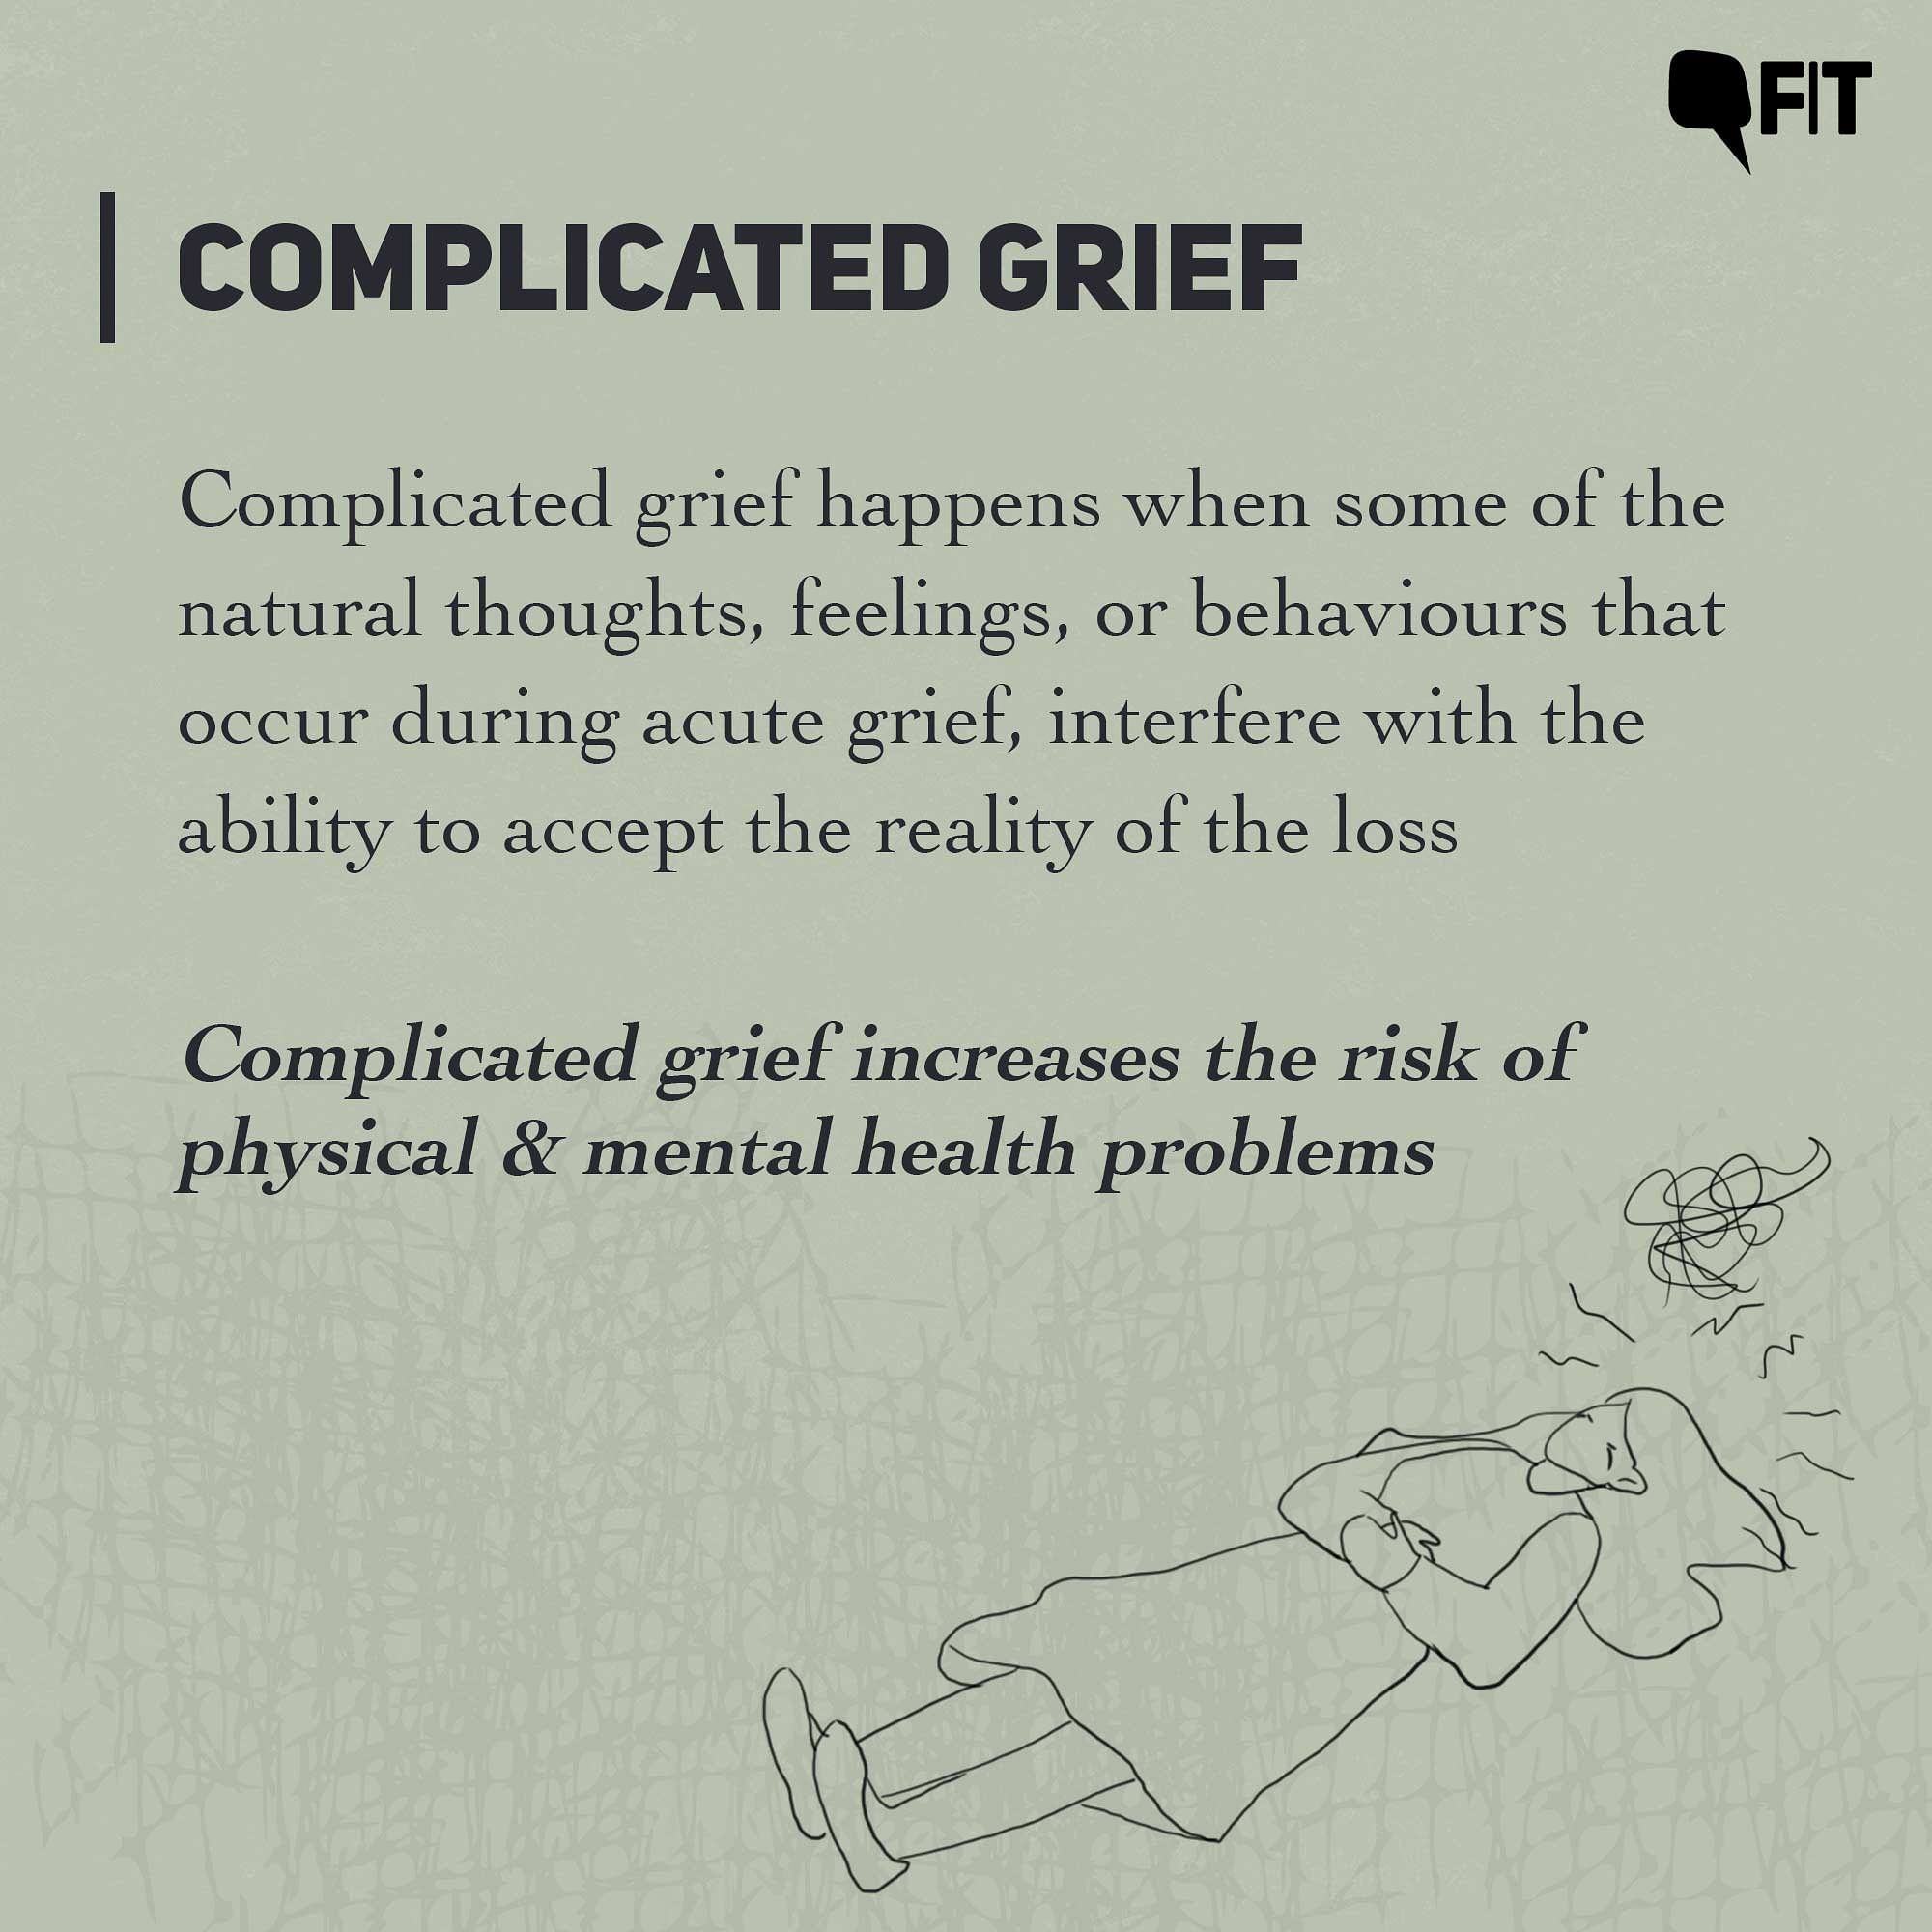 faceboof and its negative effects on grief